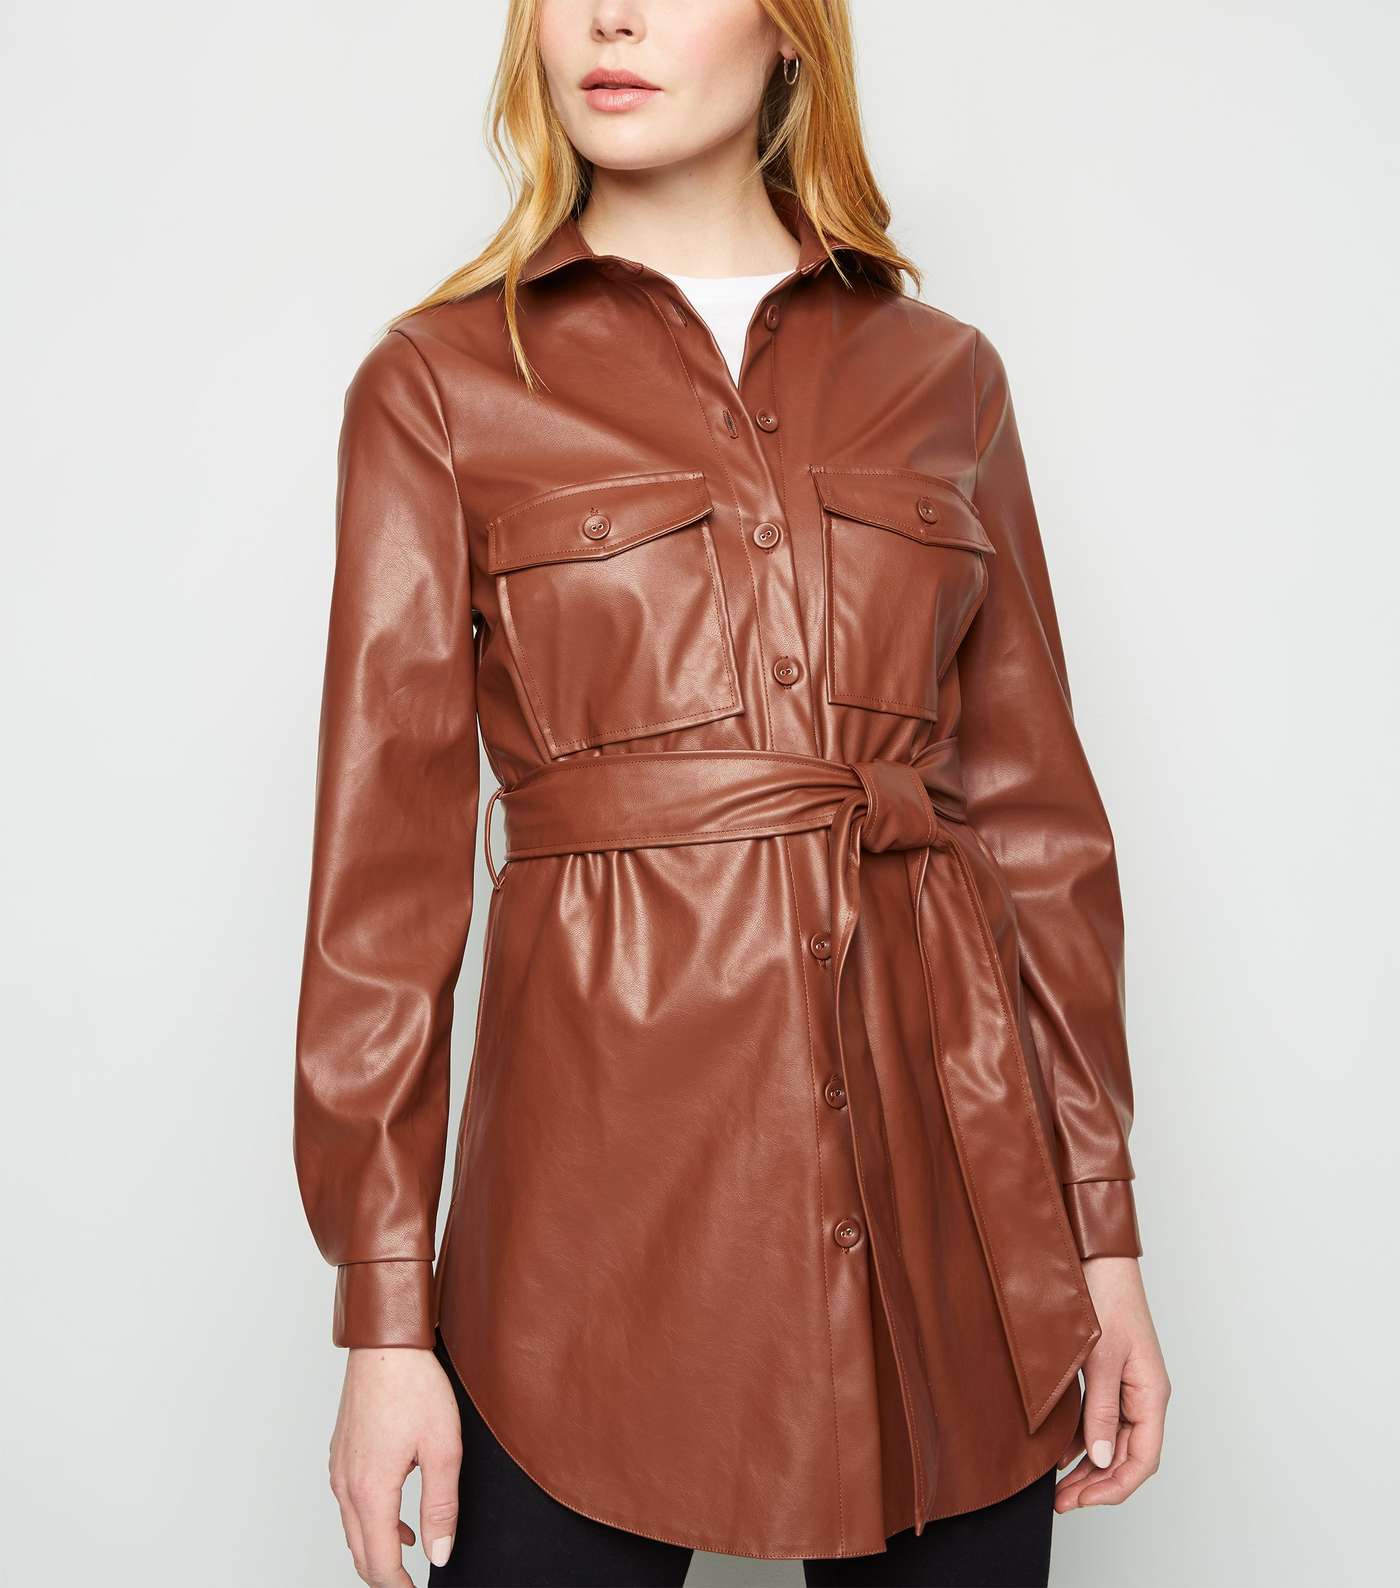 Tan Leather-Look Belted Shirt